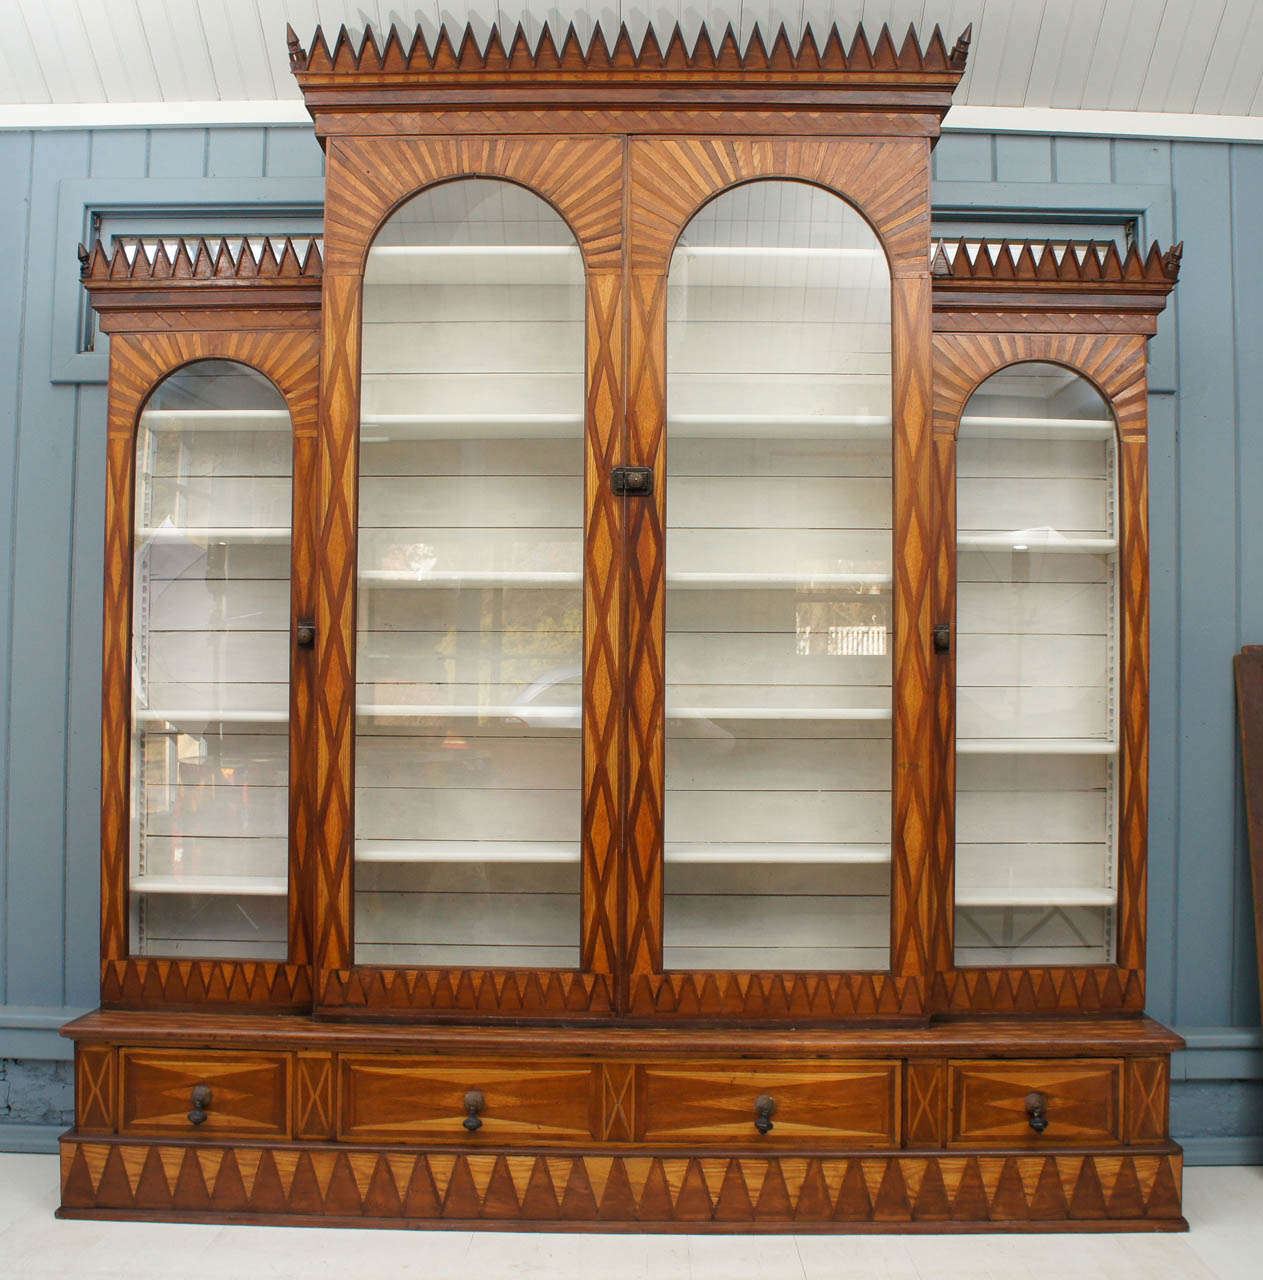 Uncommon circa 1870 large breakfront form cabinet of slim profile having full parquetry geometric veneers in mahogany, chestnut, oak, and walnut. Top cornices having triangular crenellation with canted spike finial corners above projecting central